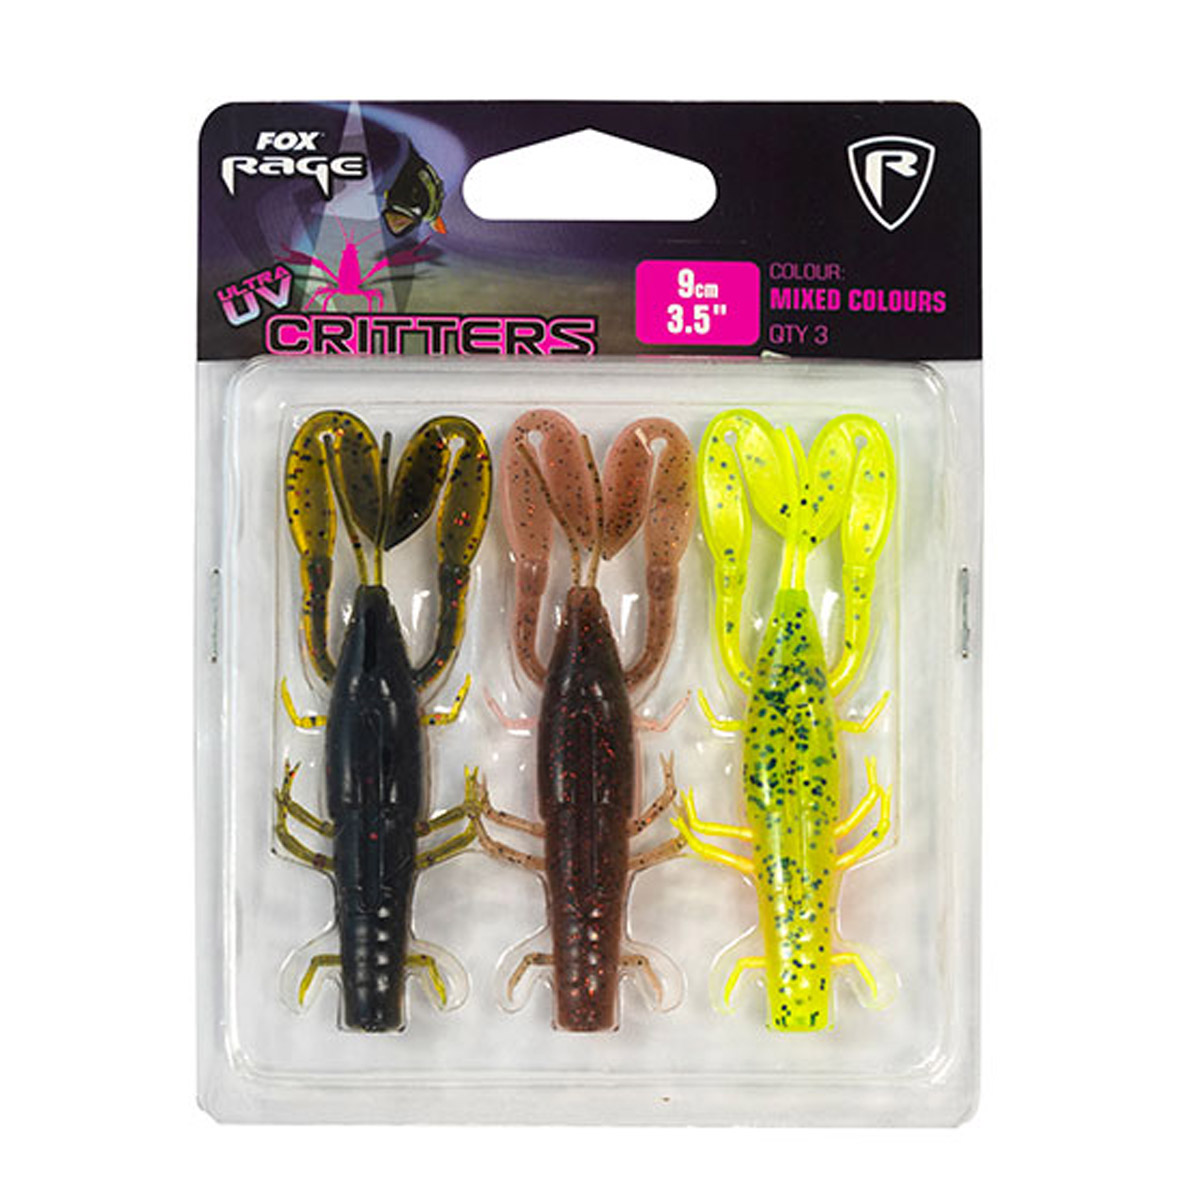 Fox Rage Critters UV Mixed Colour Pack